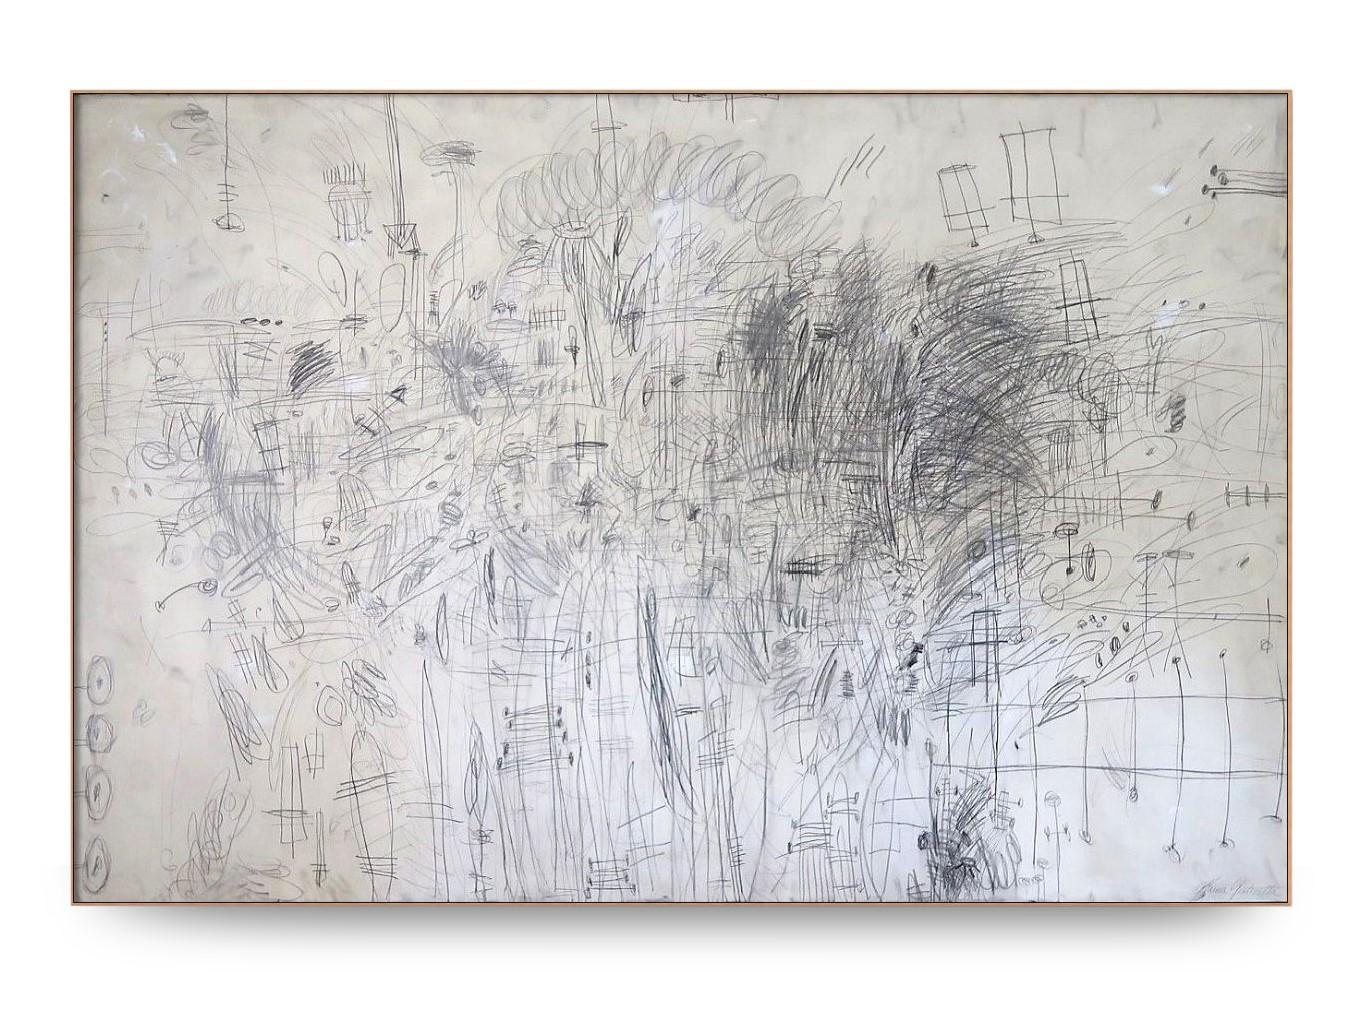 Karina Gentinetta Abstract Painting - "A Moment in Time" Oversized Acrylic, Pencils Abstract in Black and White 72x108